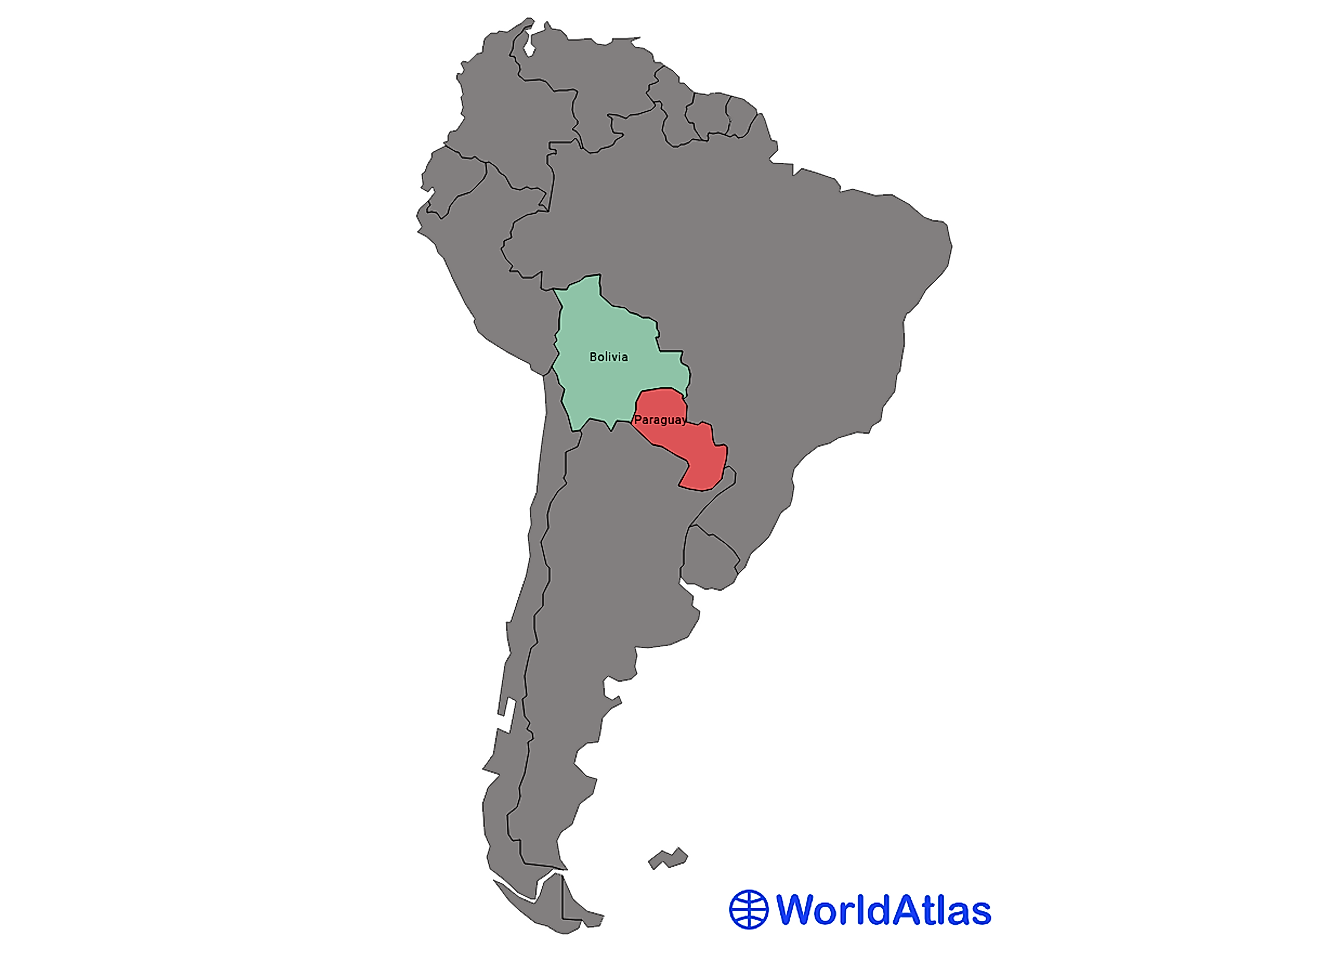 South America has 12 sovereign states; only Bolivia and Paraguay are are landlocked.